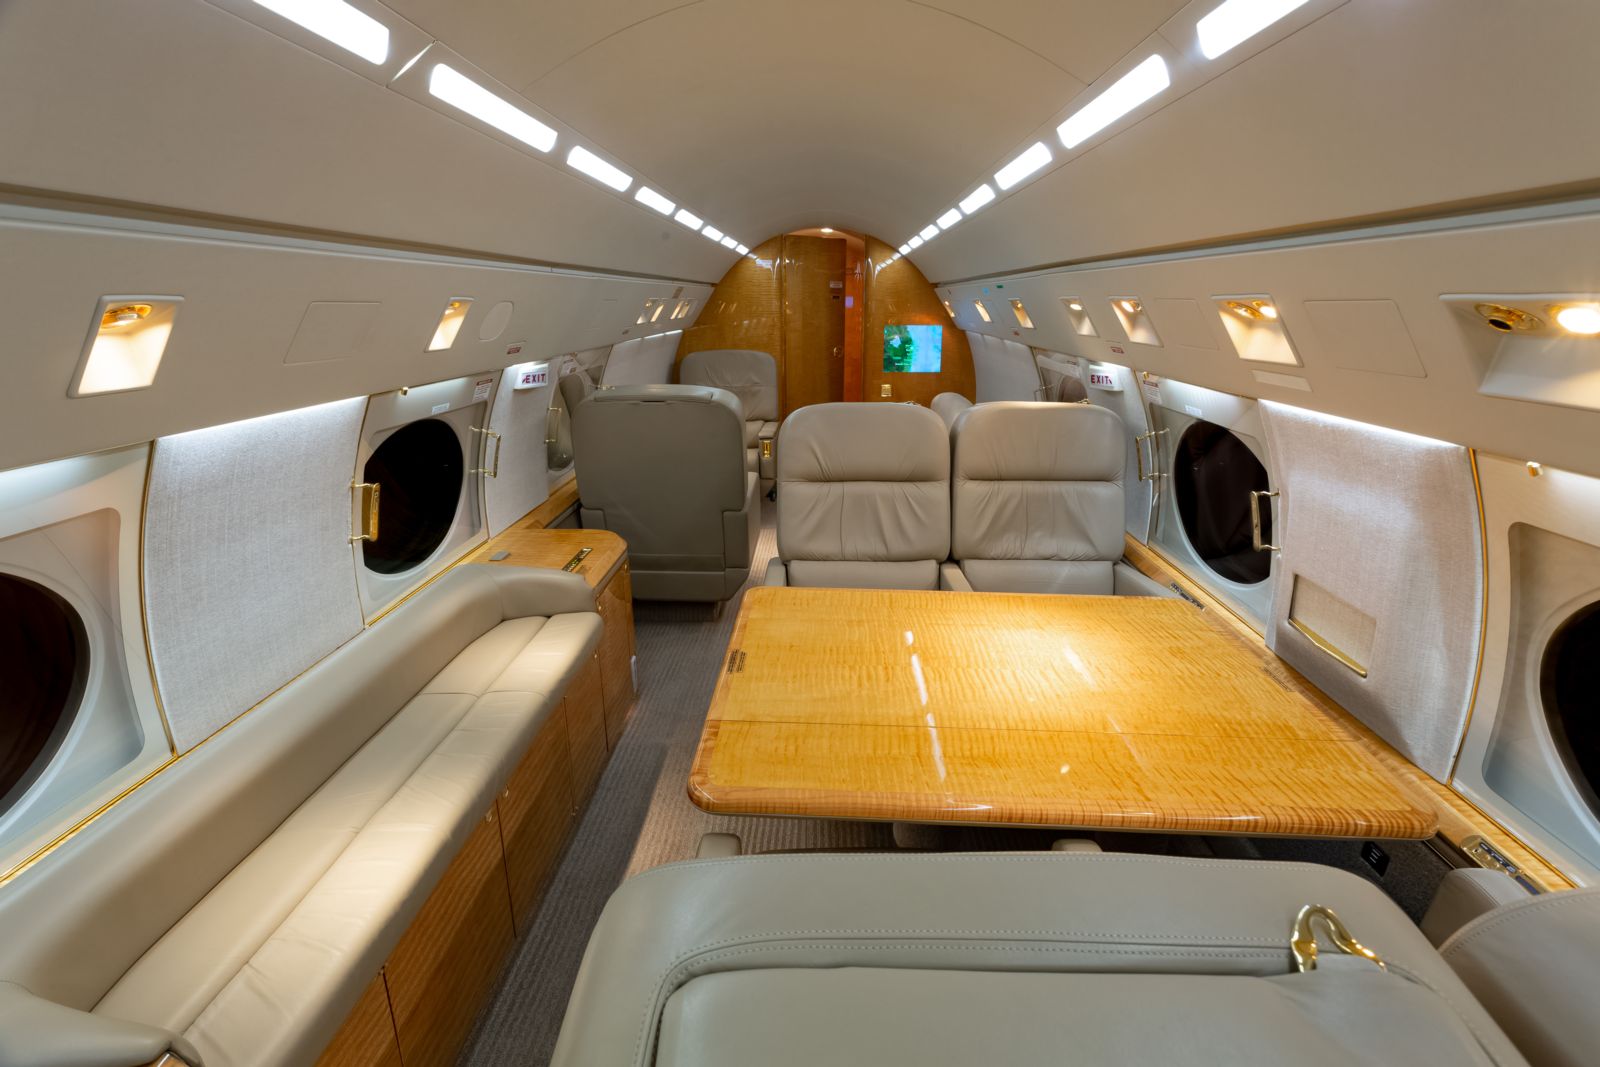 Gulfstream GV  S/N 563 for sale | gallery image: /userfiles/files/4%20bfp_9990%20mid%20to%20aft%20table.jpg